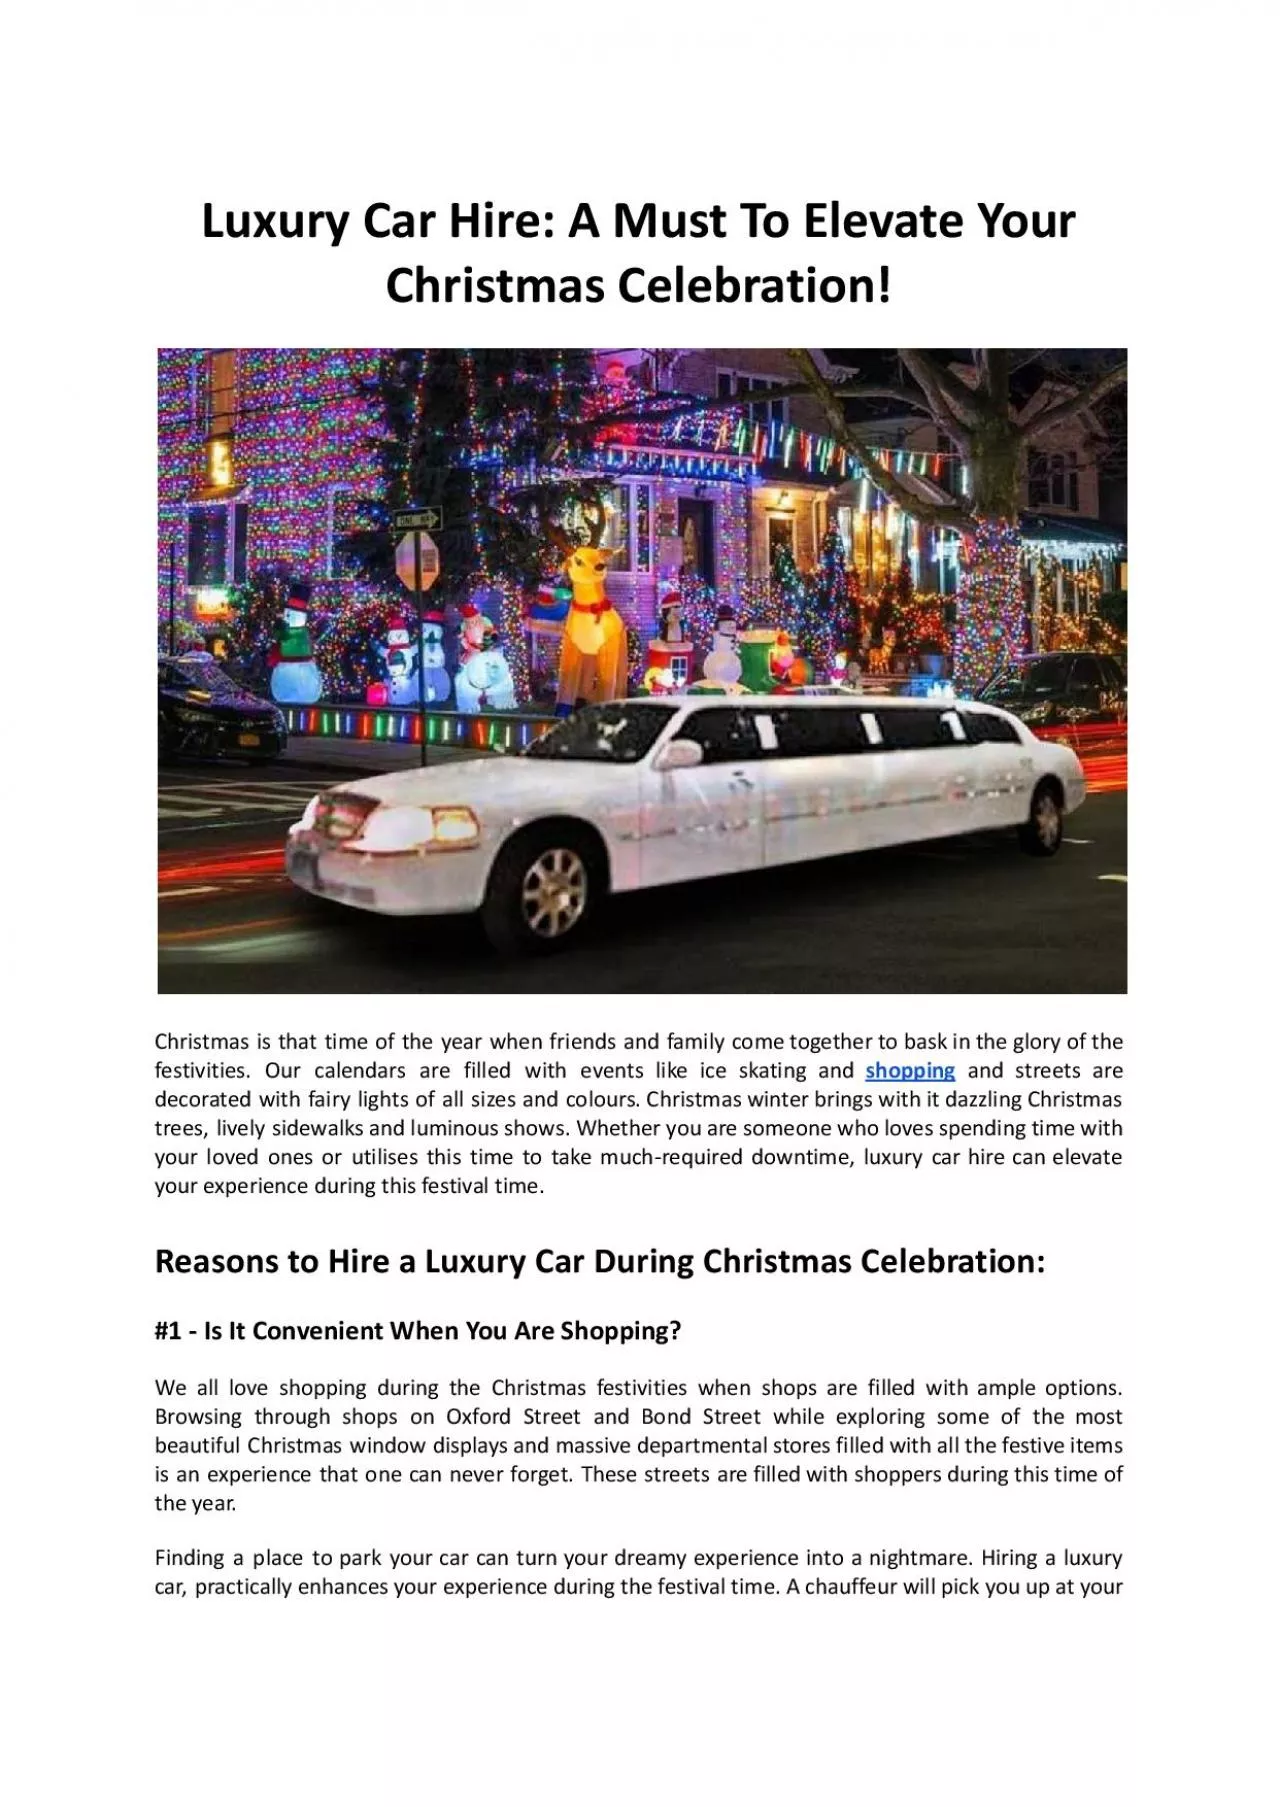 Luxury Car Hire - A Must To Elevate Your Christmas Celebration